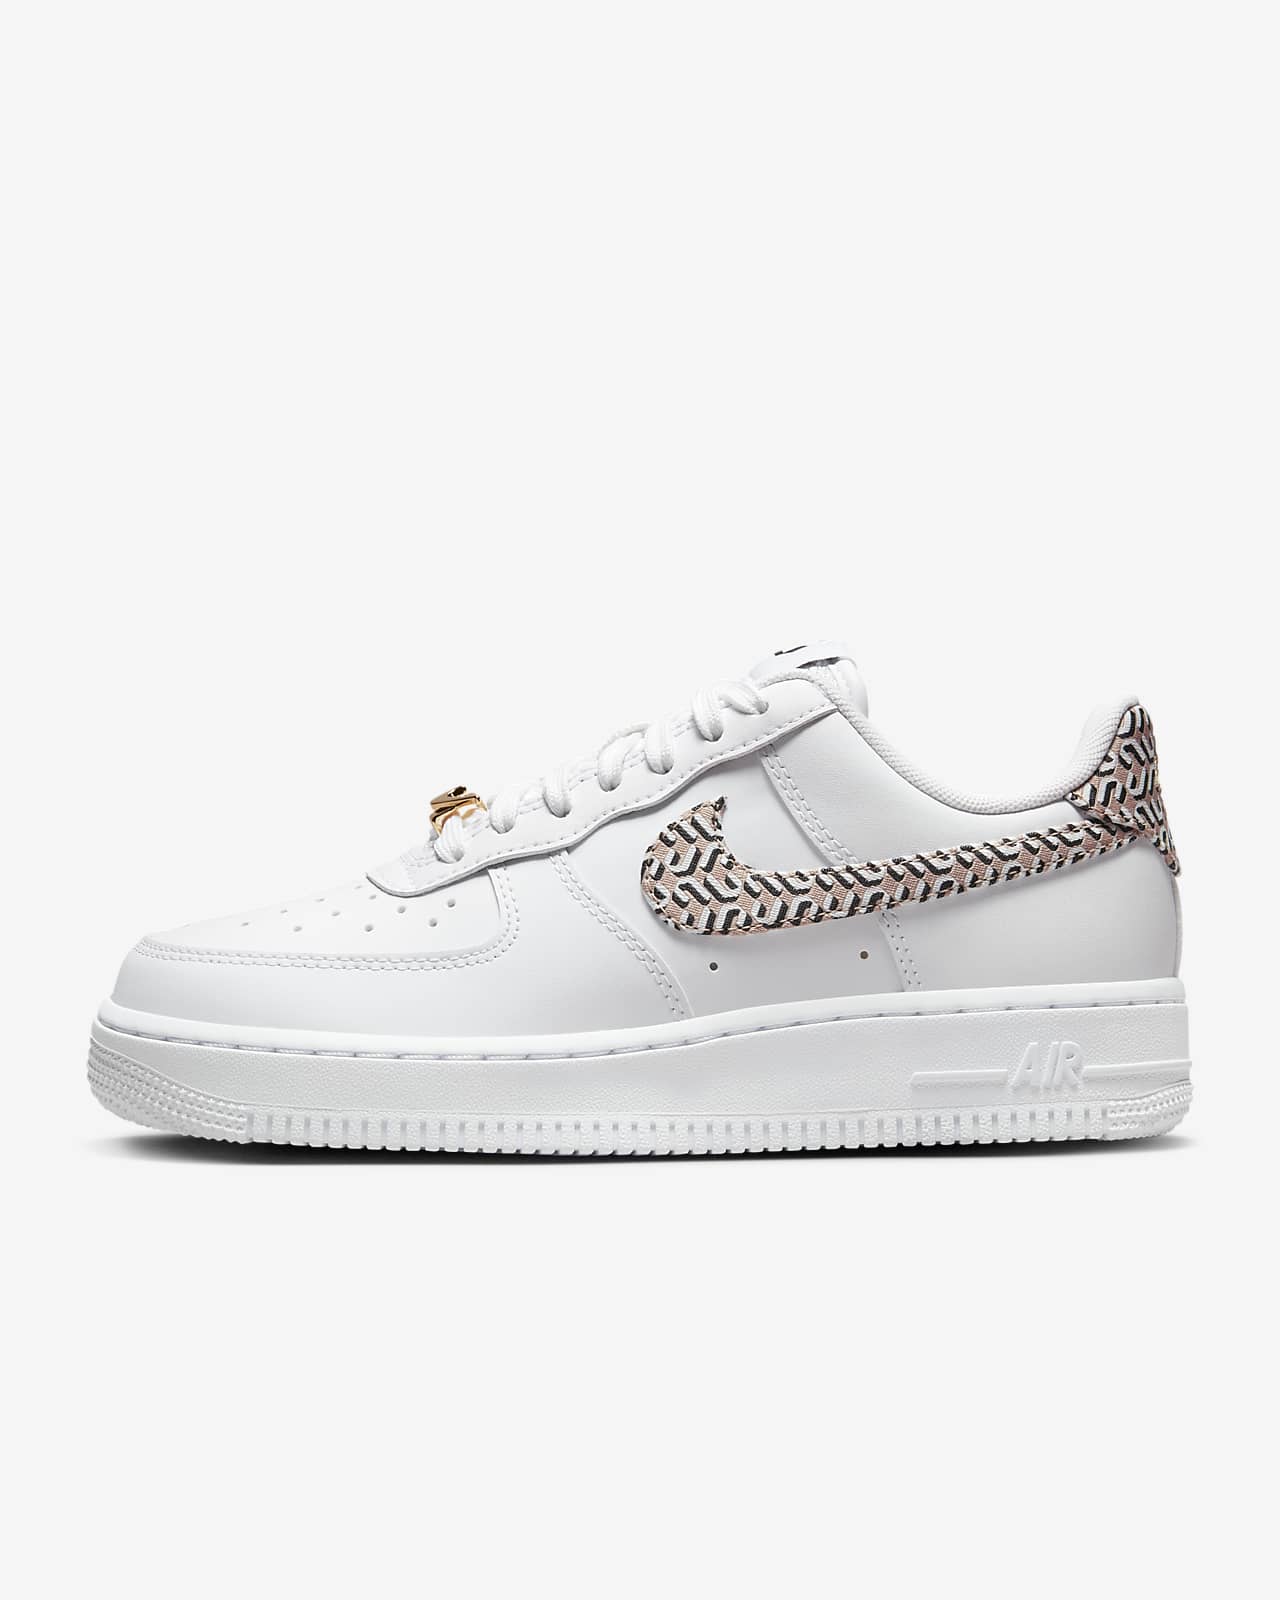 Chaussure Nike Air Force 1 LX United pour femme